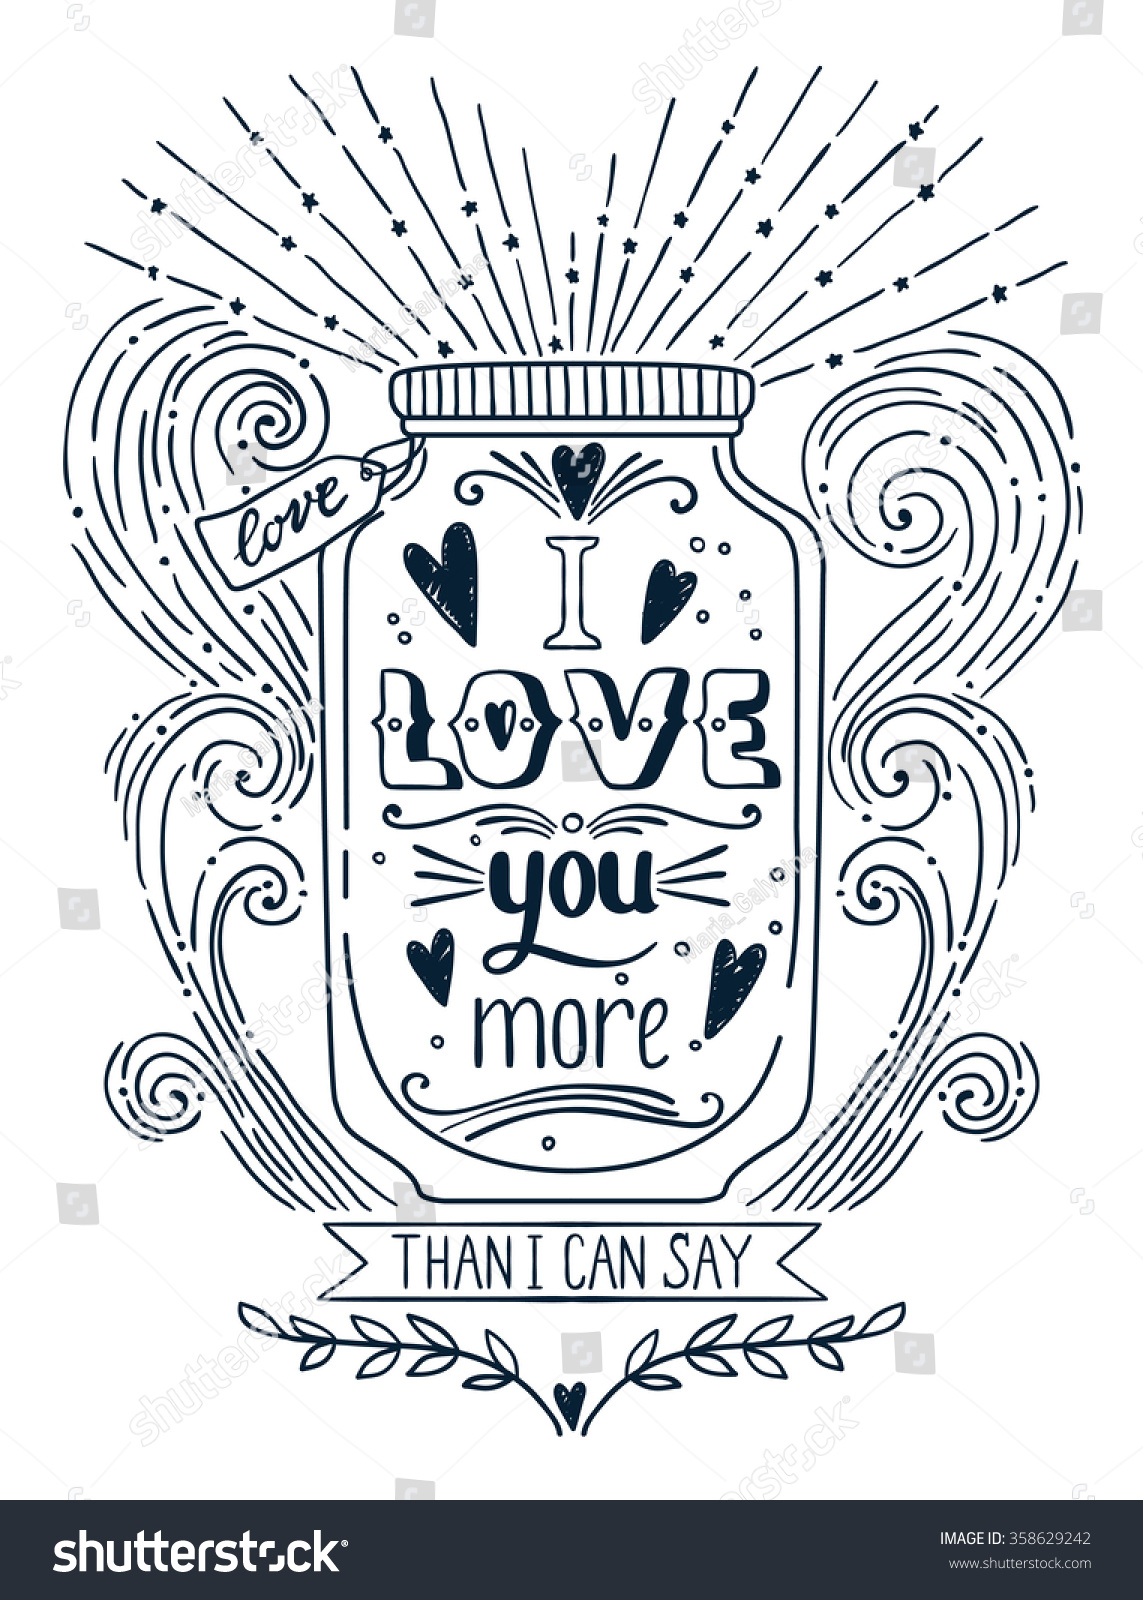 I love you more than I can say Hand drawn vintage print with a jar